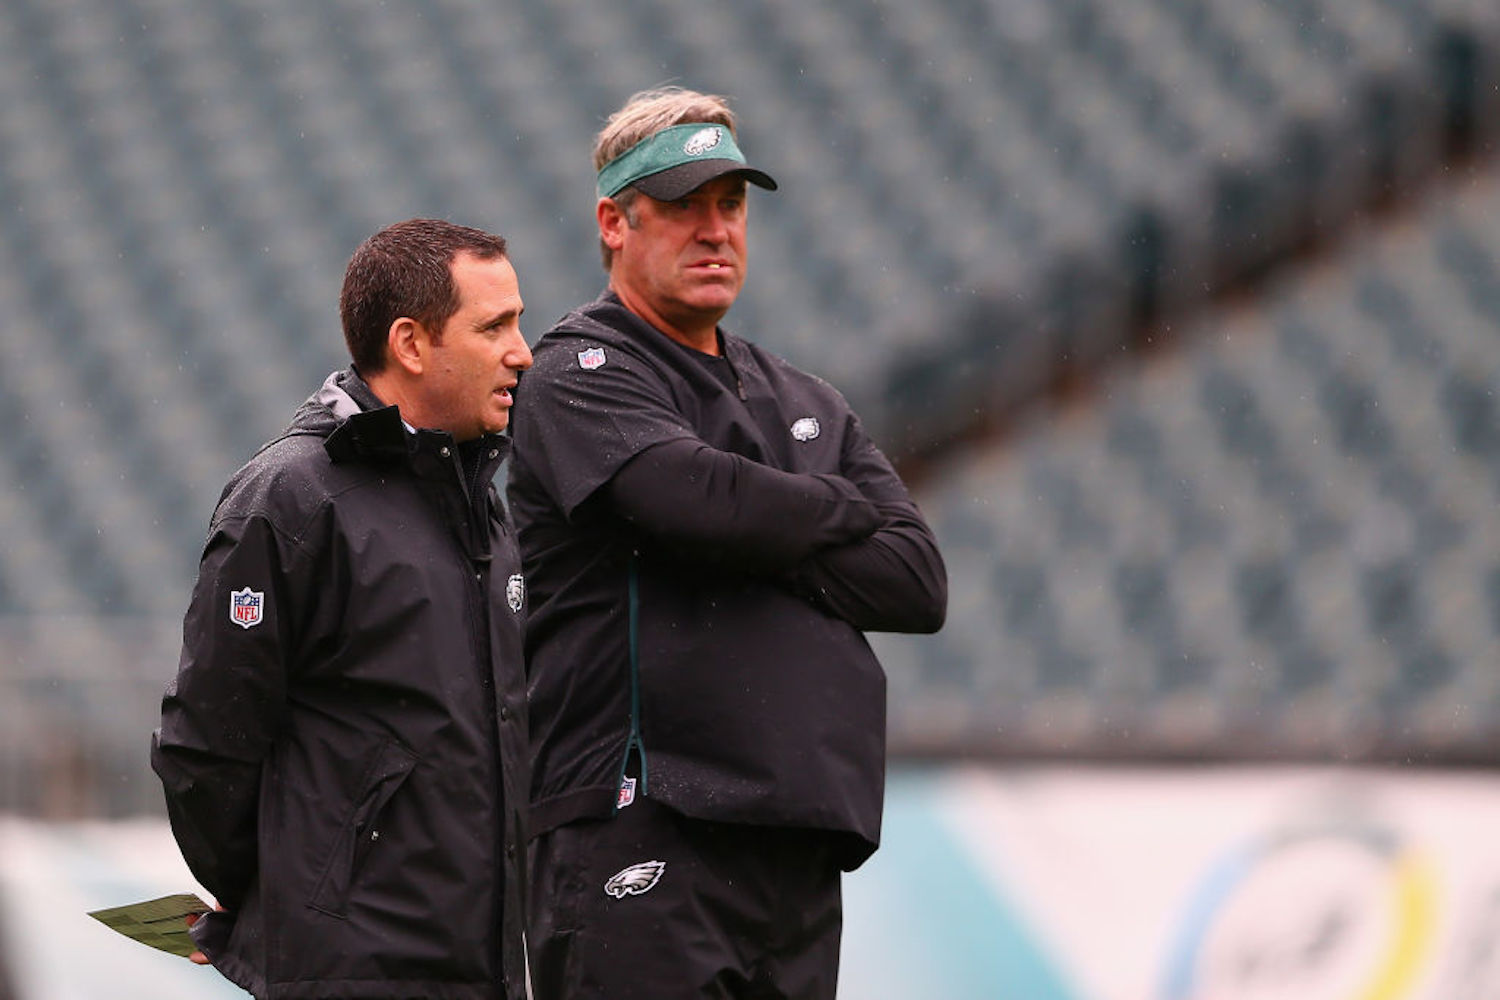 Doug Pederson is out as the head coach of the Philadelphia Eagles, but the team's biggest problem still resides in the front office.